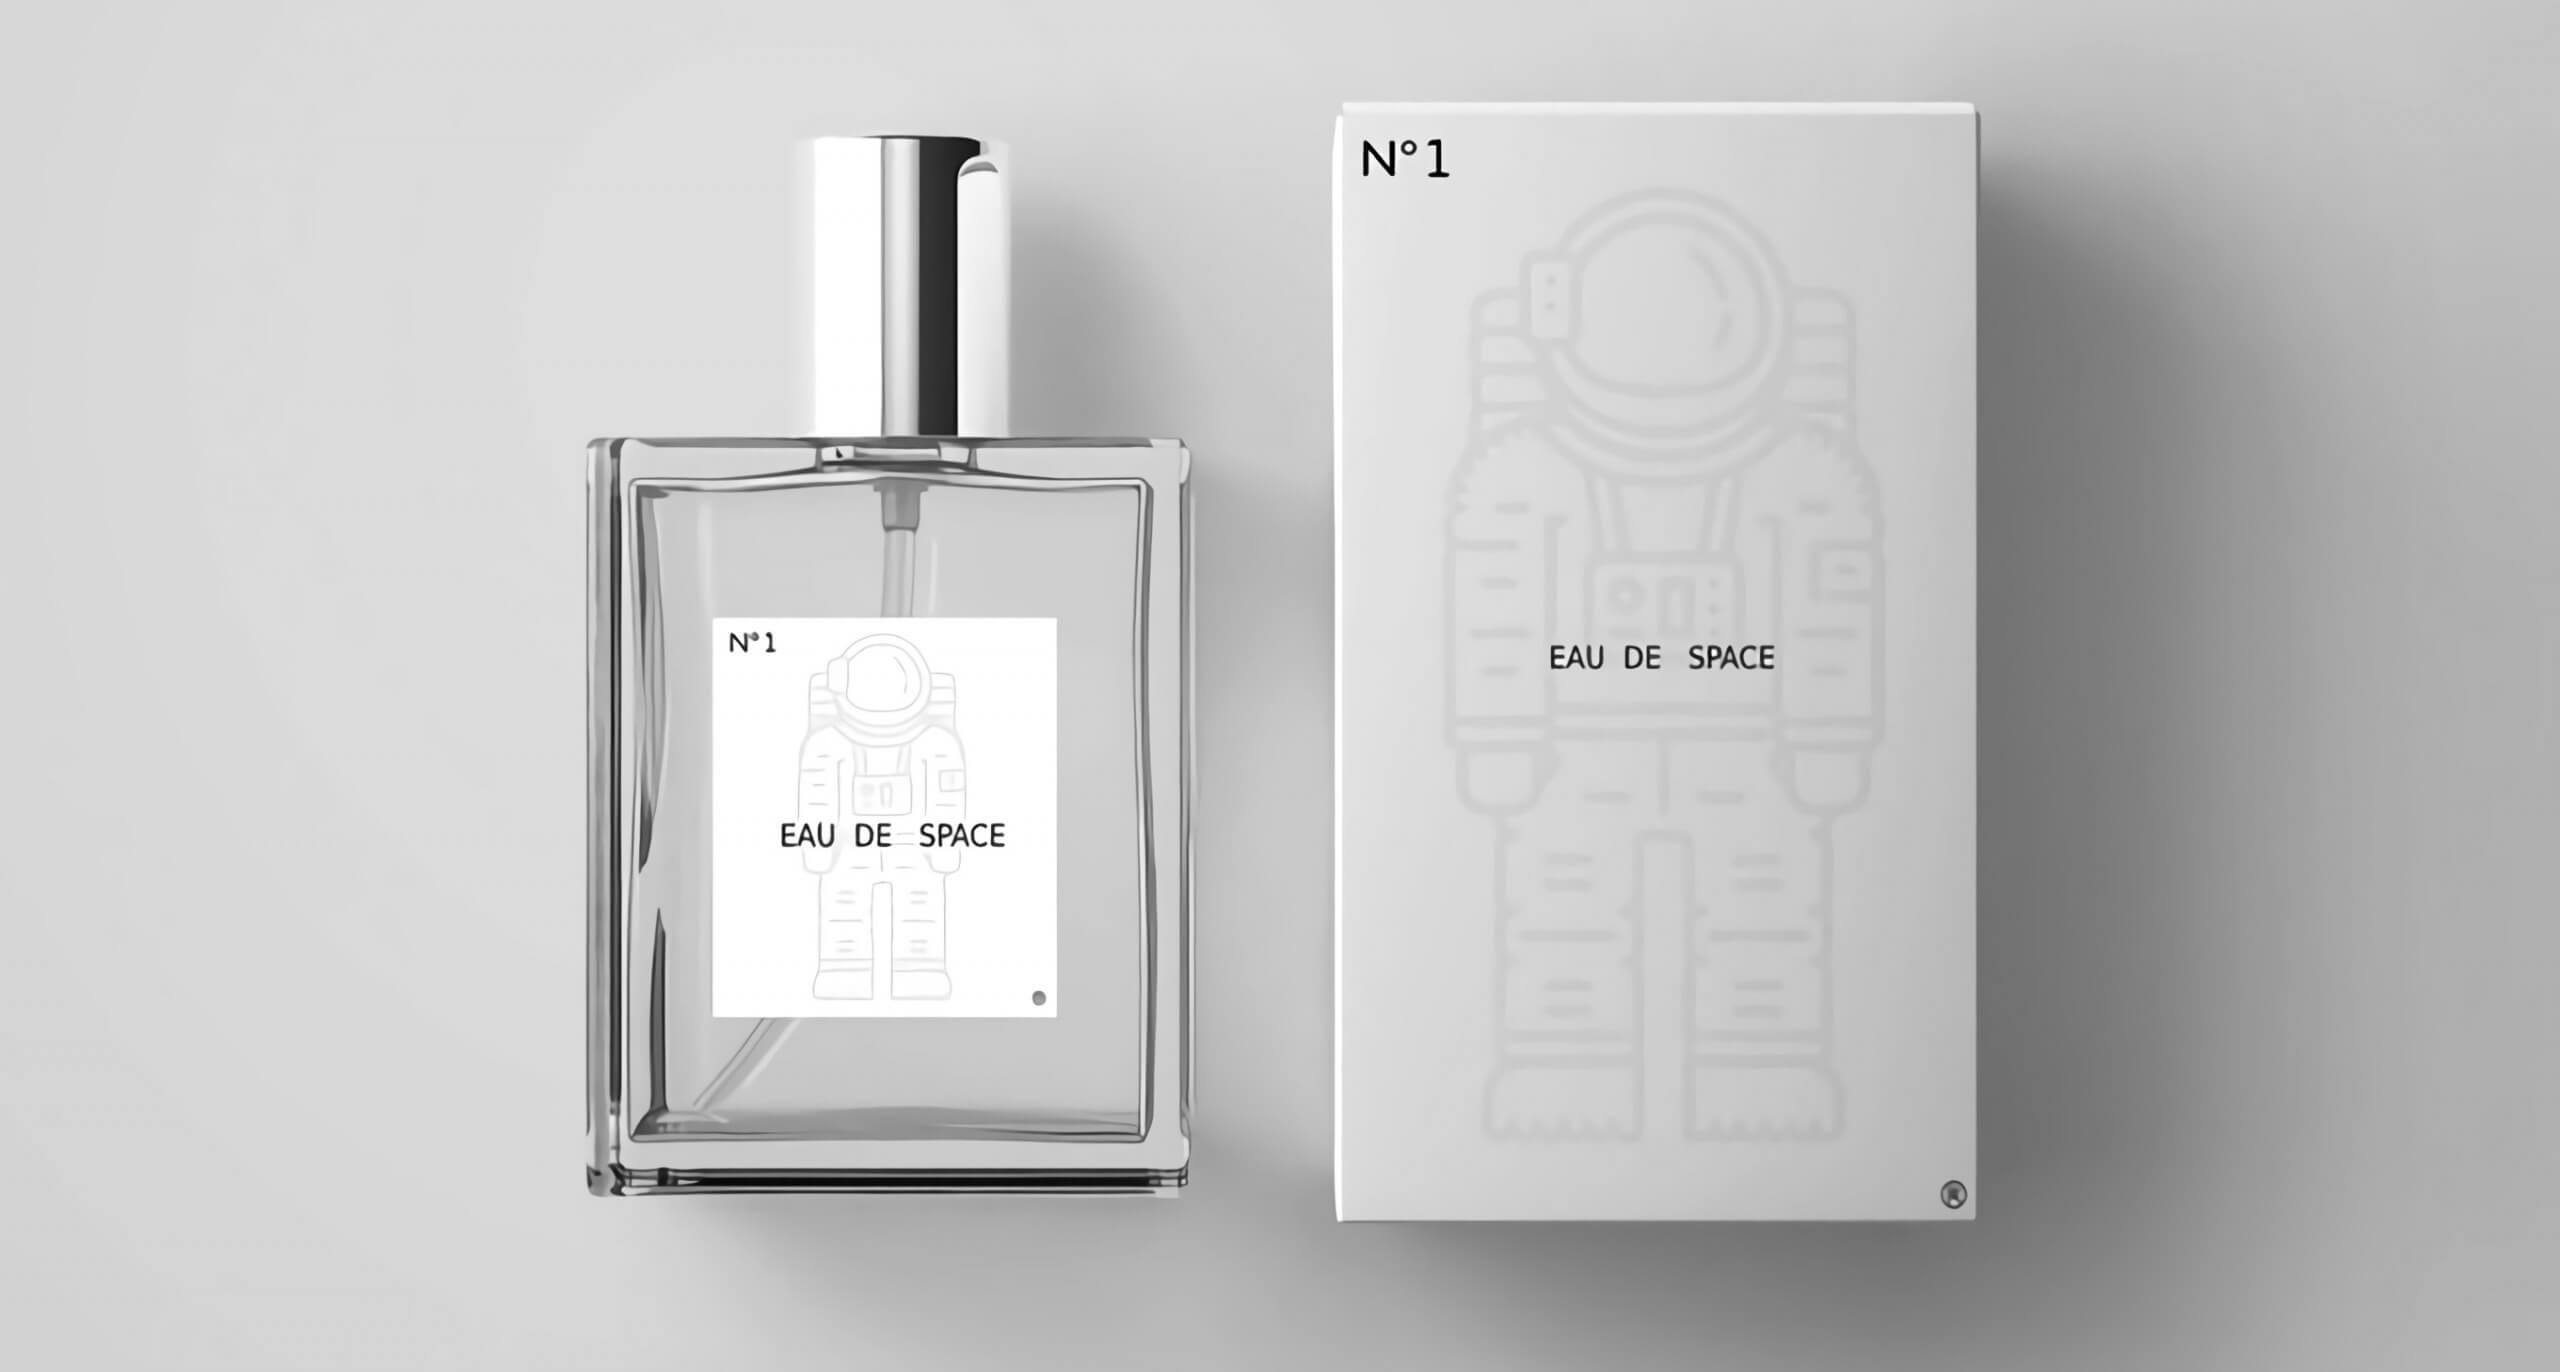 NASA released its 'space-scented' fragrance to the public in a 'one-off production'